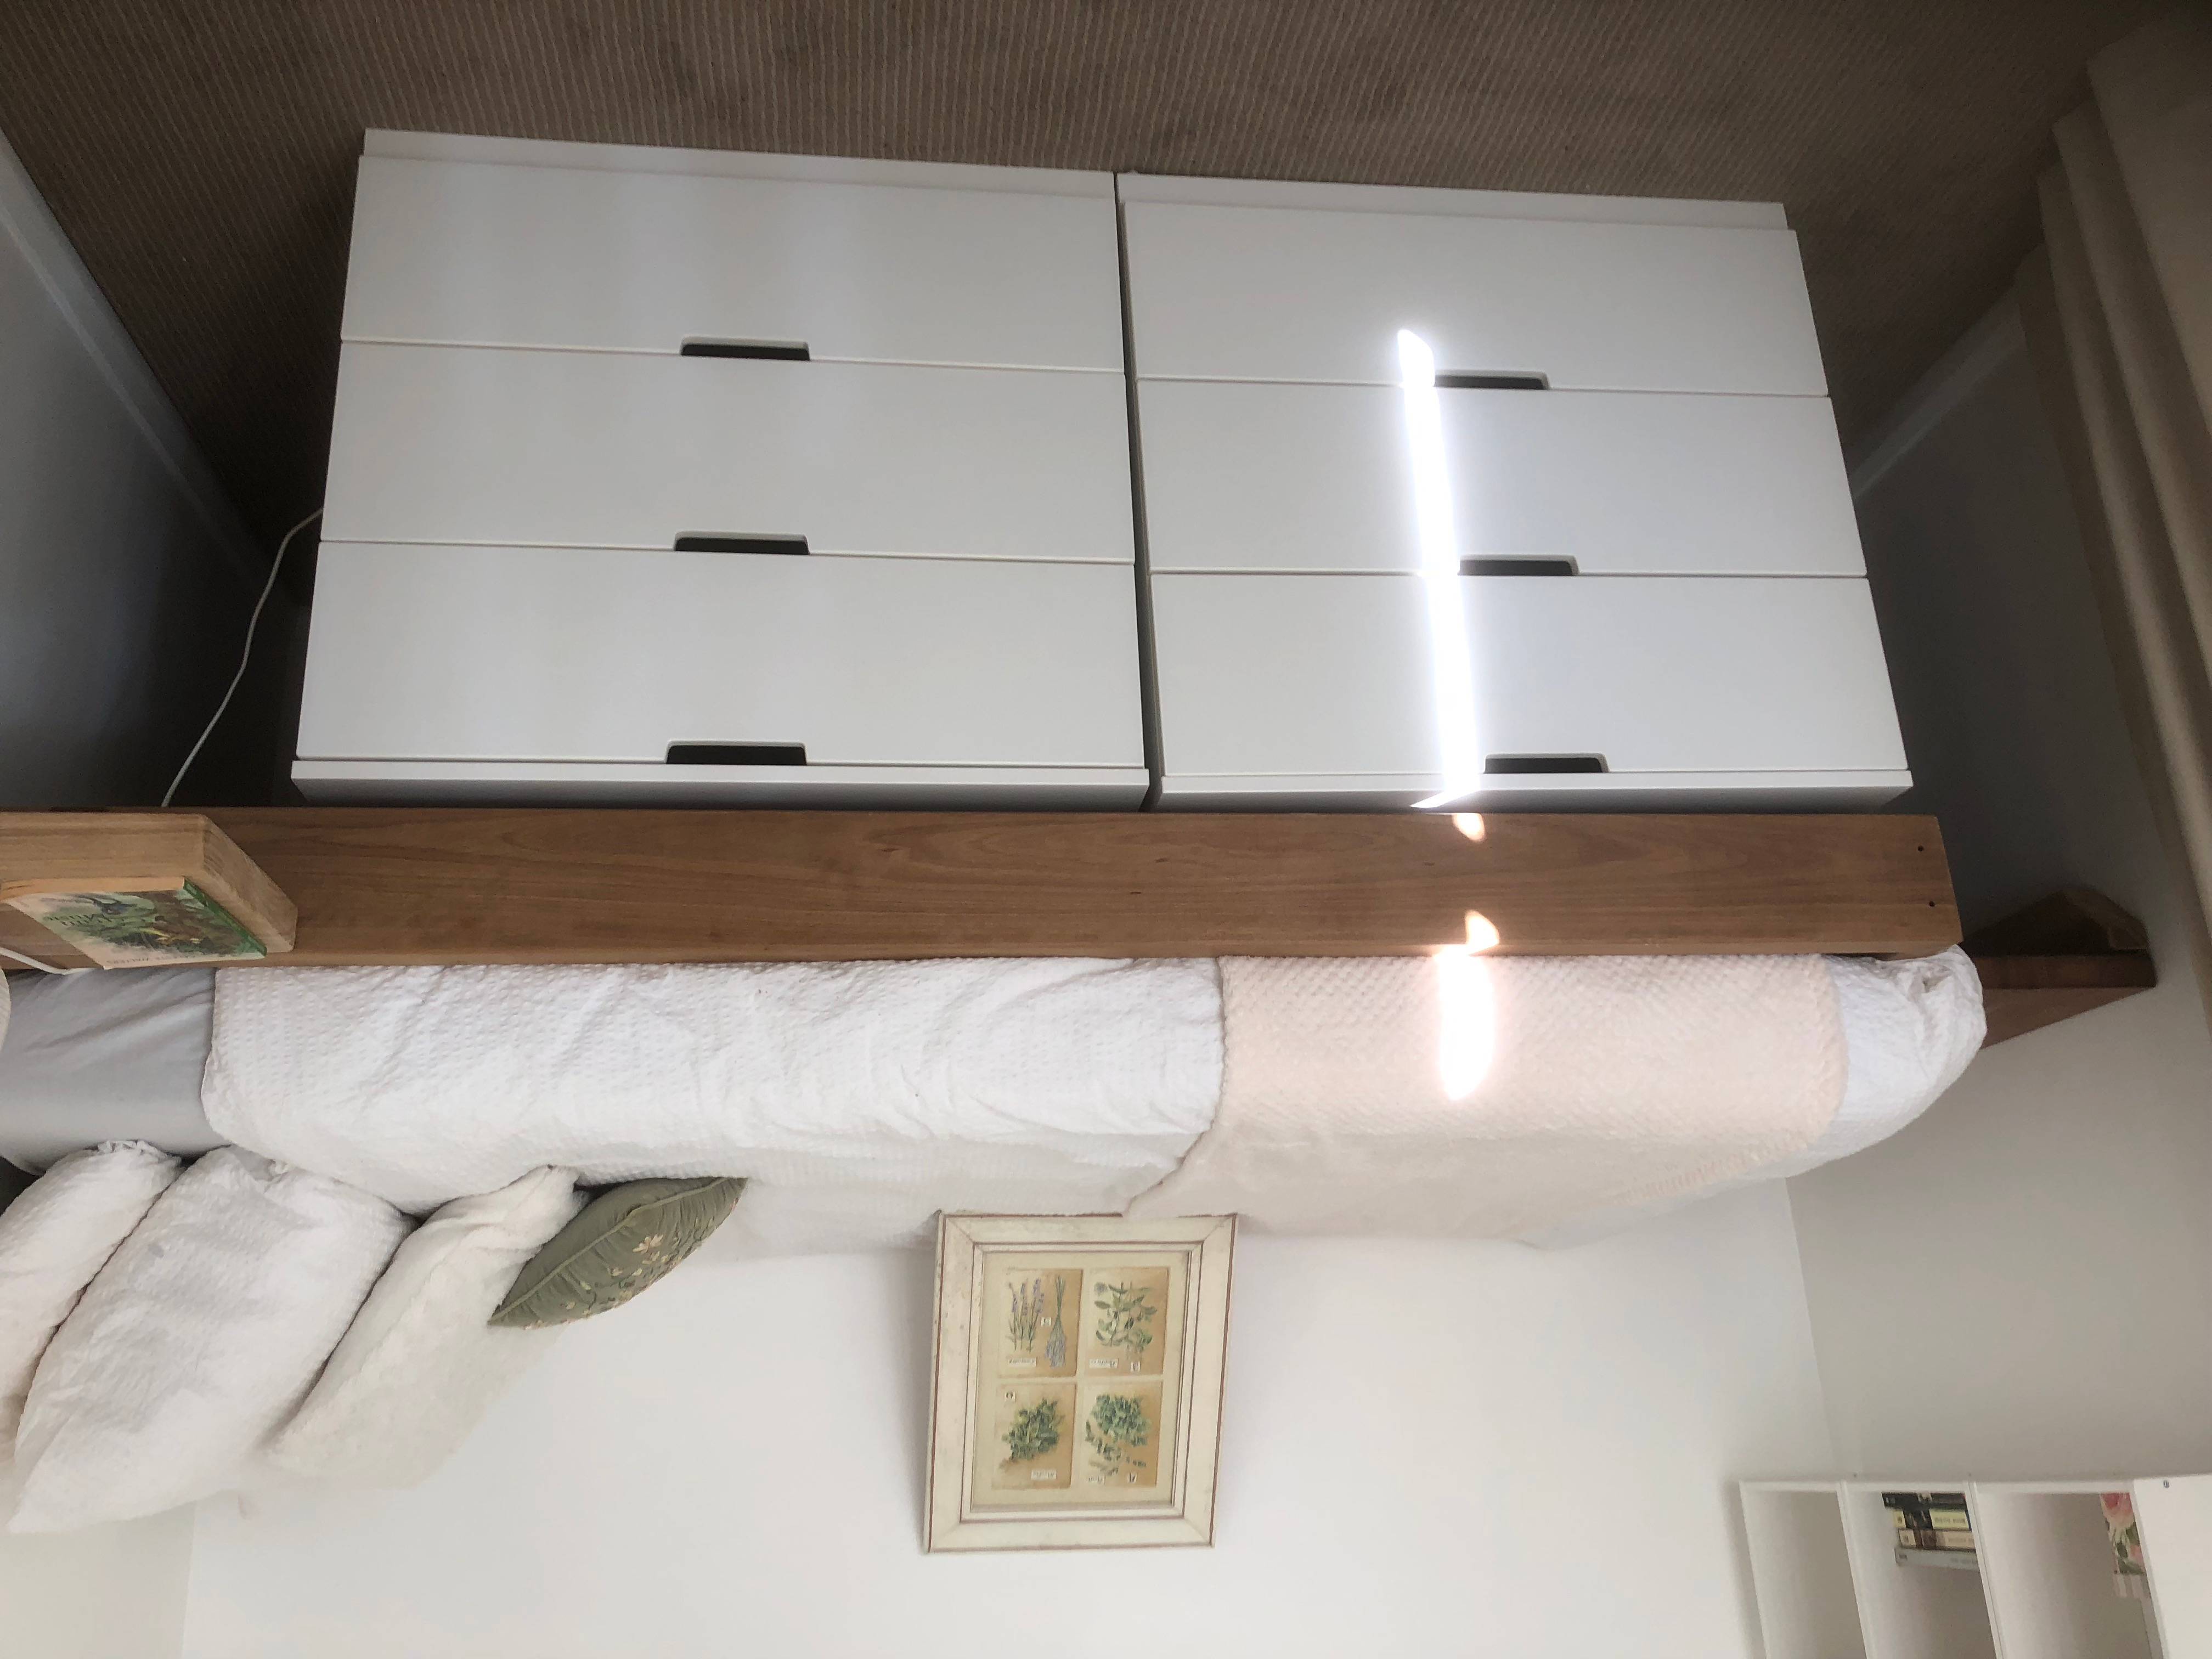 Bunk With Drawers Under